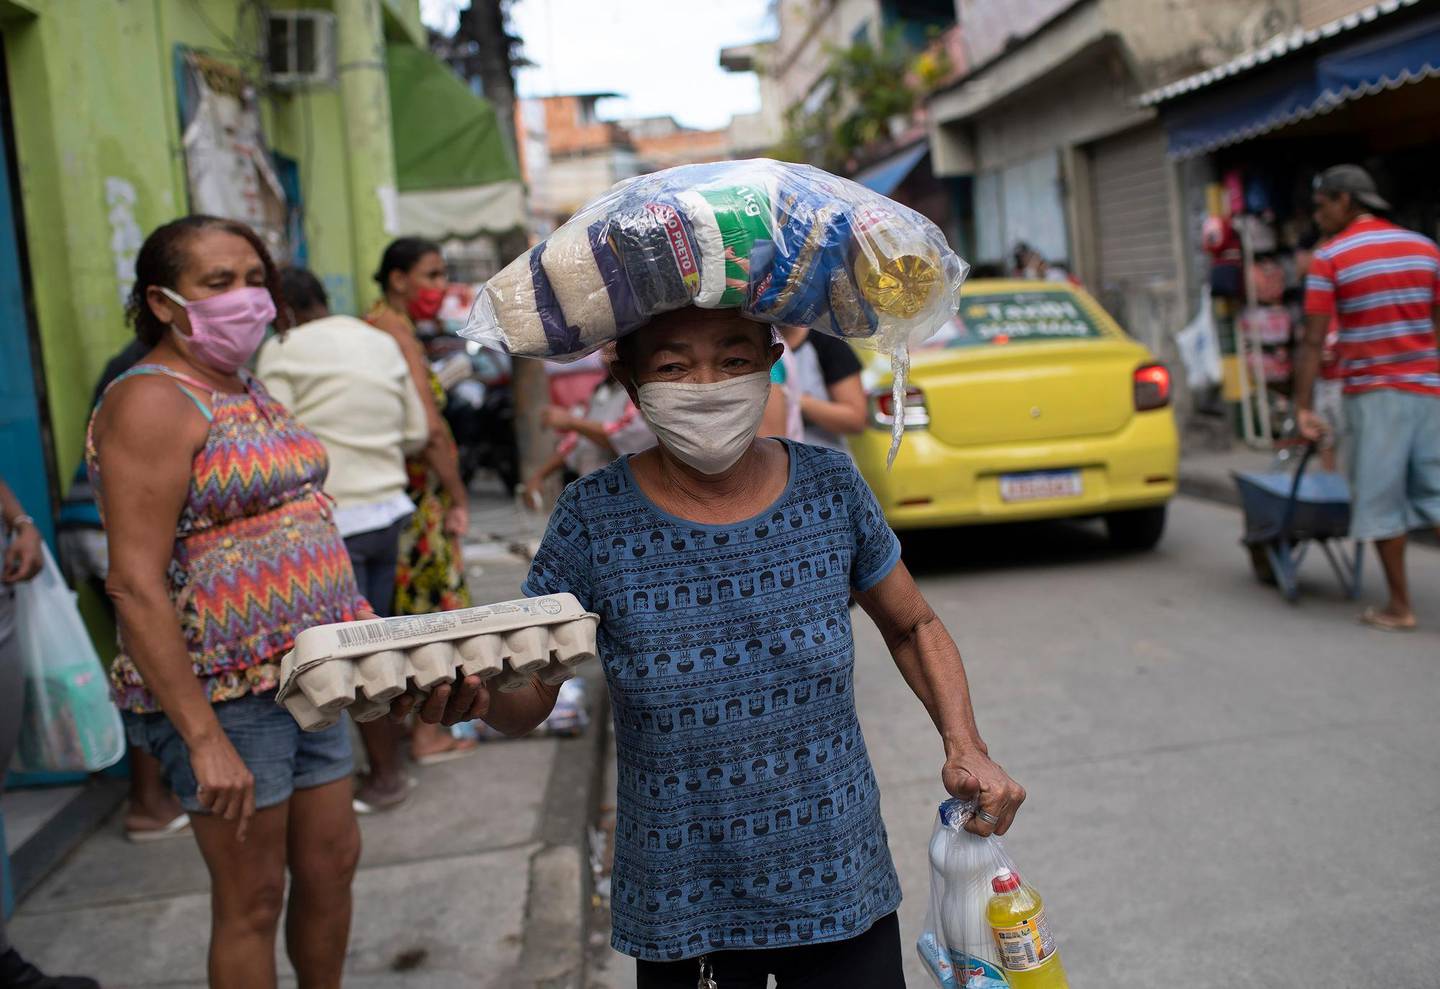 Maria Rita Dias dos Santos, 53, wearing a protective mask, carries food donated food from former inmates, part of a nonprofit organization known as  Eu sou Eu or I am me, who are delivering food to people struggling due to the new coronavirus pandemic, at the Para-Pedro favela in Rio de Janeiro, Brazil, Friday, May 8, 2020. (AP Photo/Silvia Izquierdo)